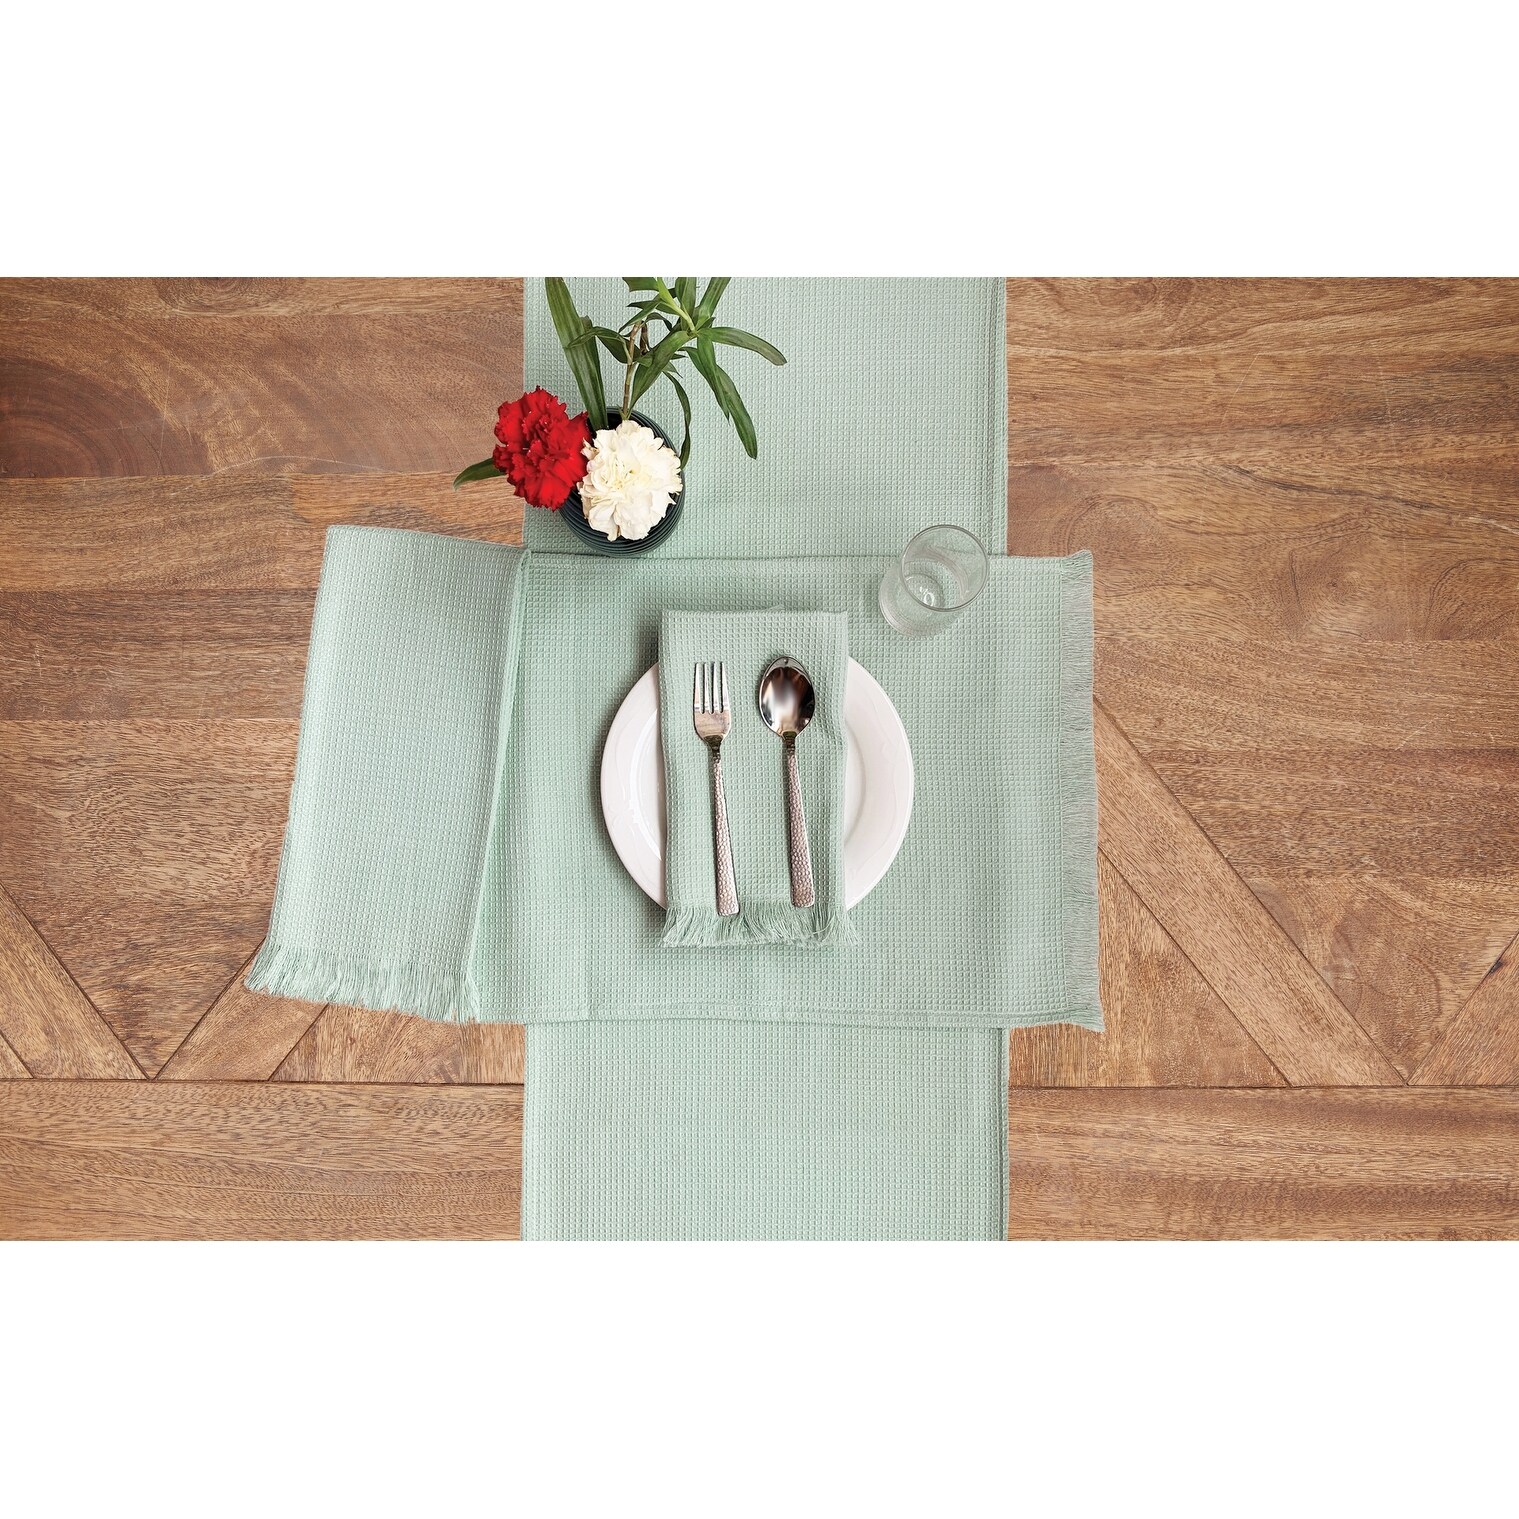 https://ak1.ostkcdn.com/images/products/is/images/direct/e062d34429f6d8d8dff8822df0beac1ab528c333/Waffle-Weave-Placemats-%28Set-of-6%29.jpg